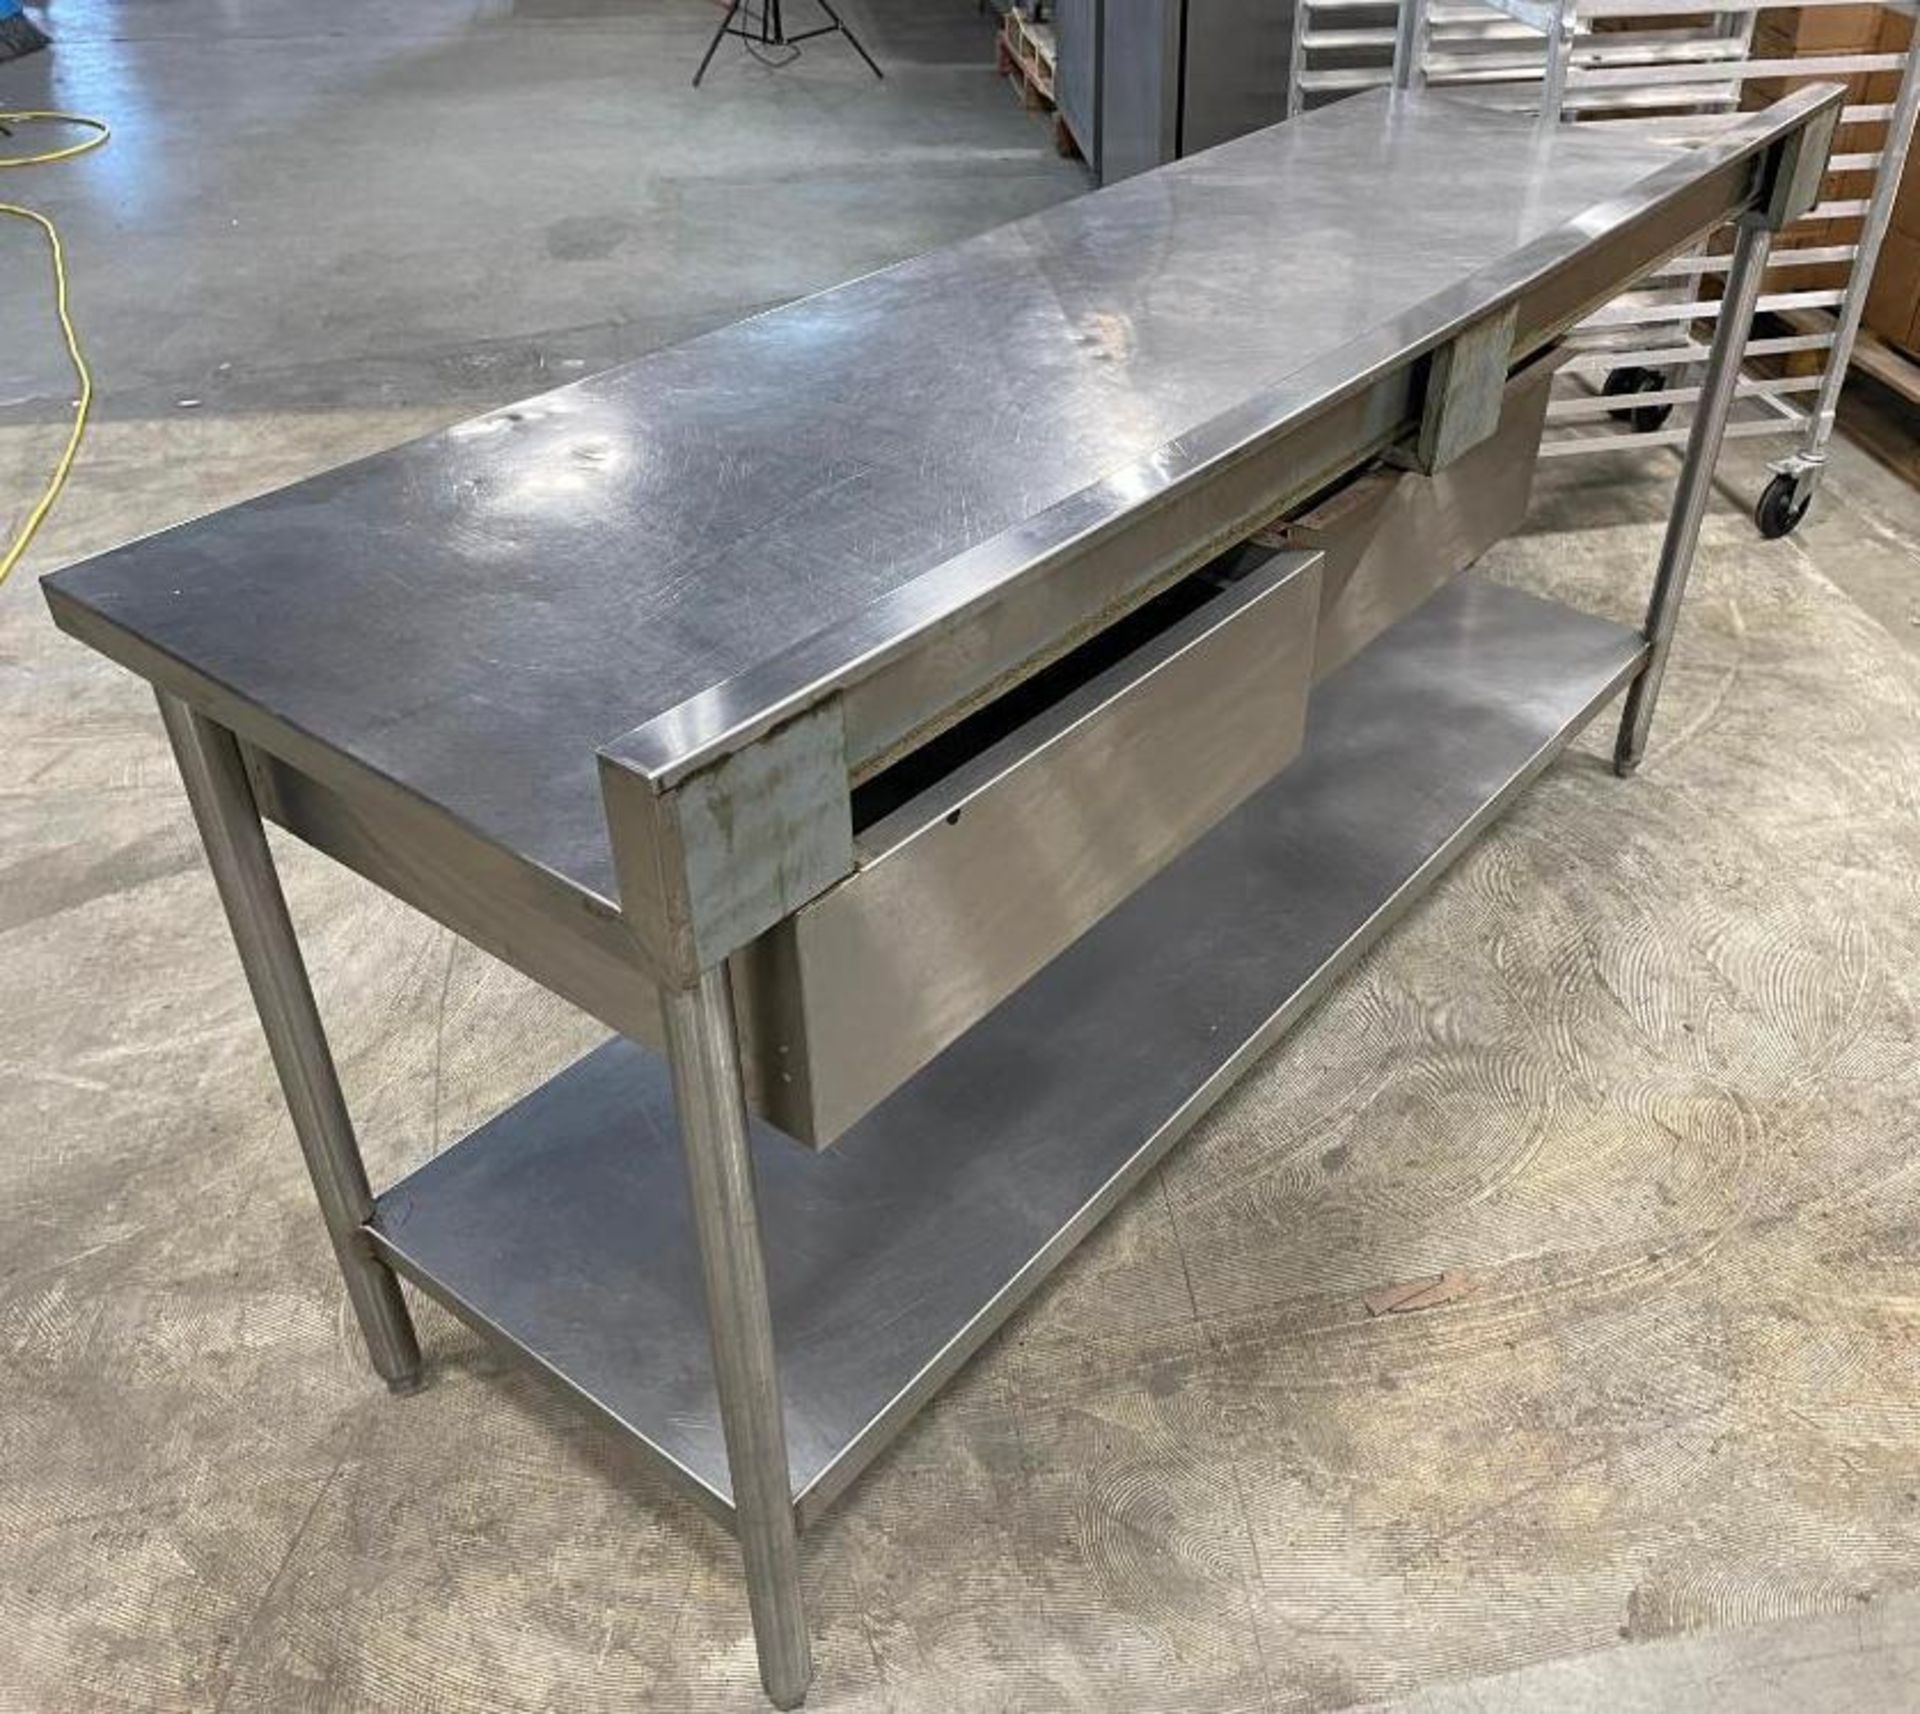 6' STAINLESS STEEL WORK TABLE WITH 2 DRAWERS AND UNDERSHELF - Image 4 of 7